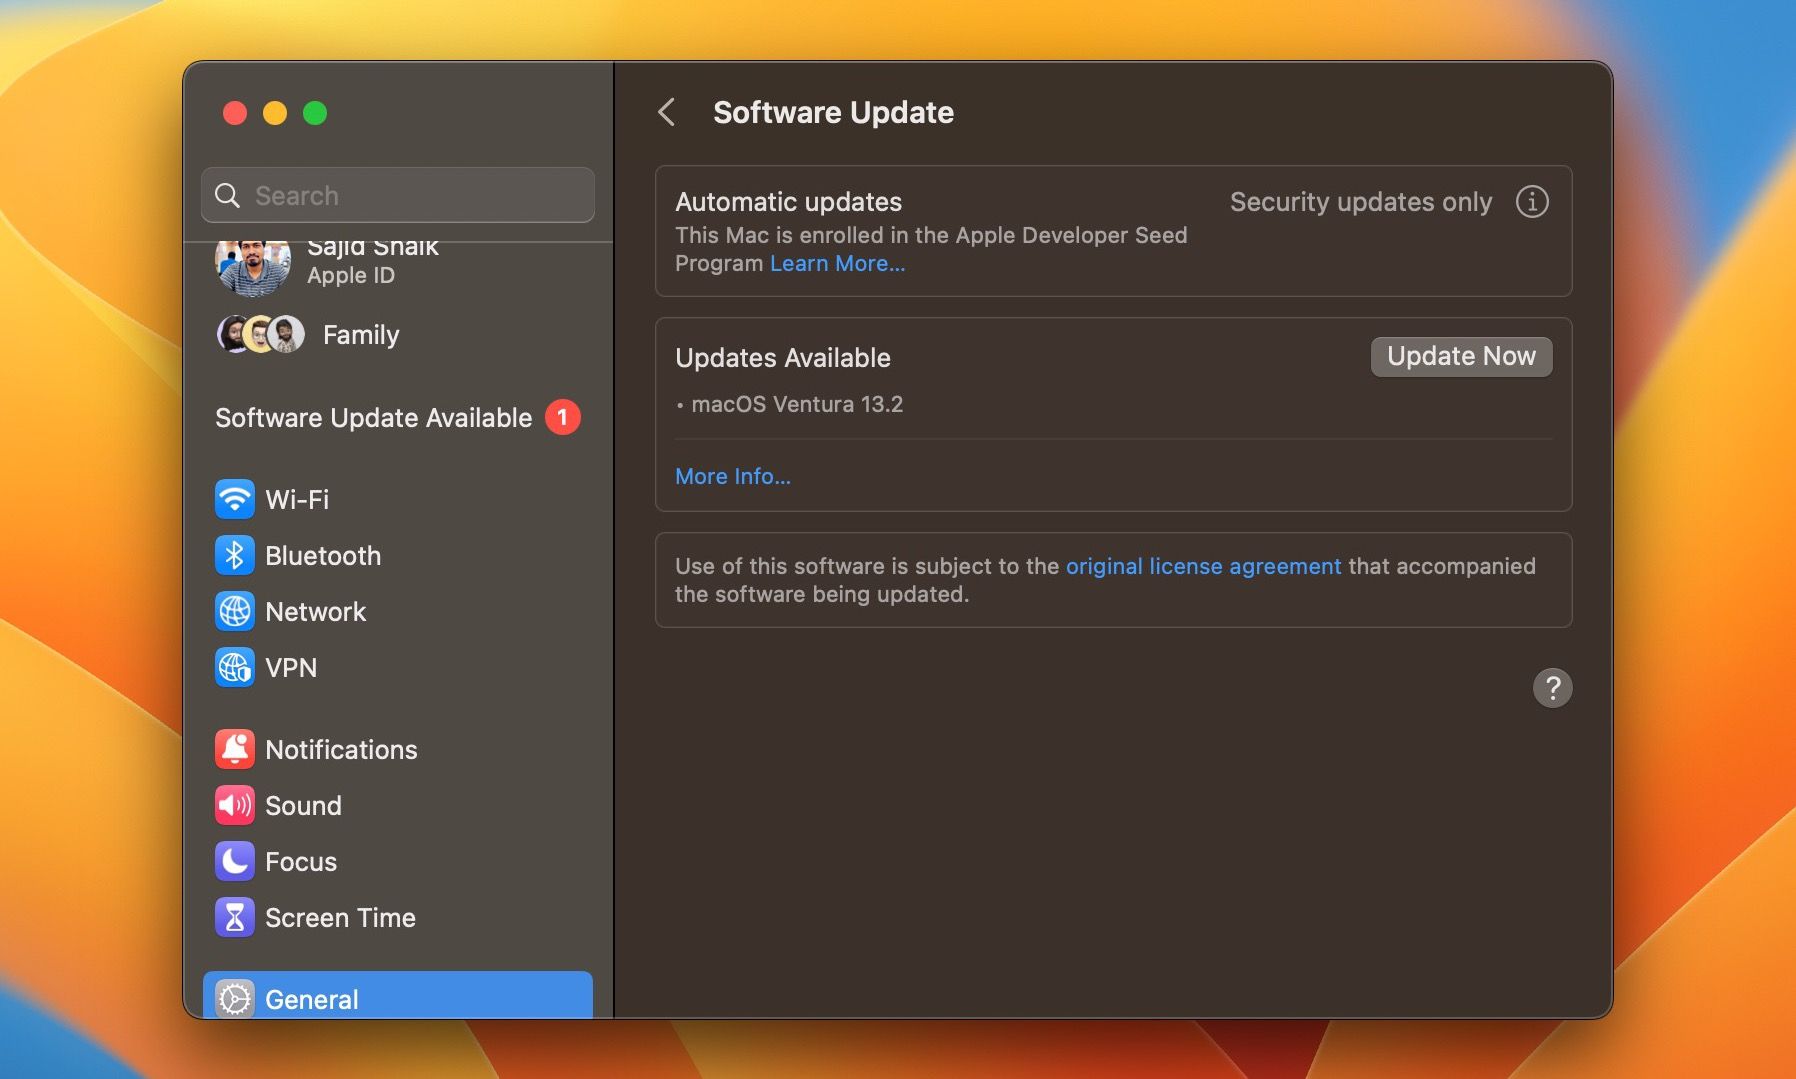 On the Software Update page in macOS System Settings, click Update Now.